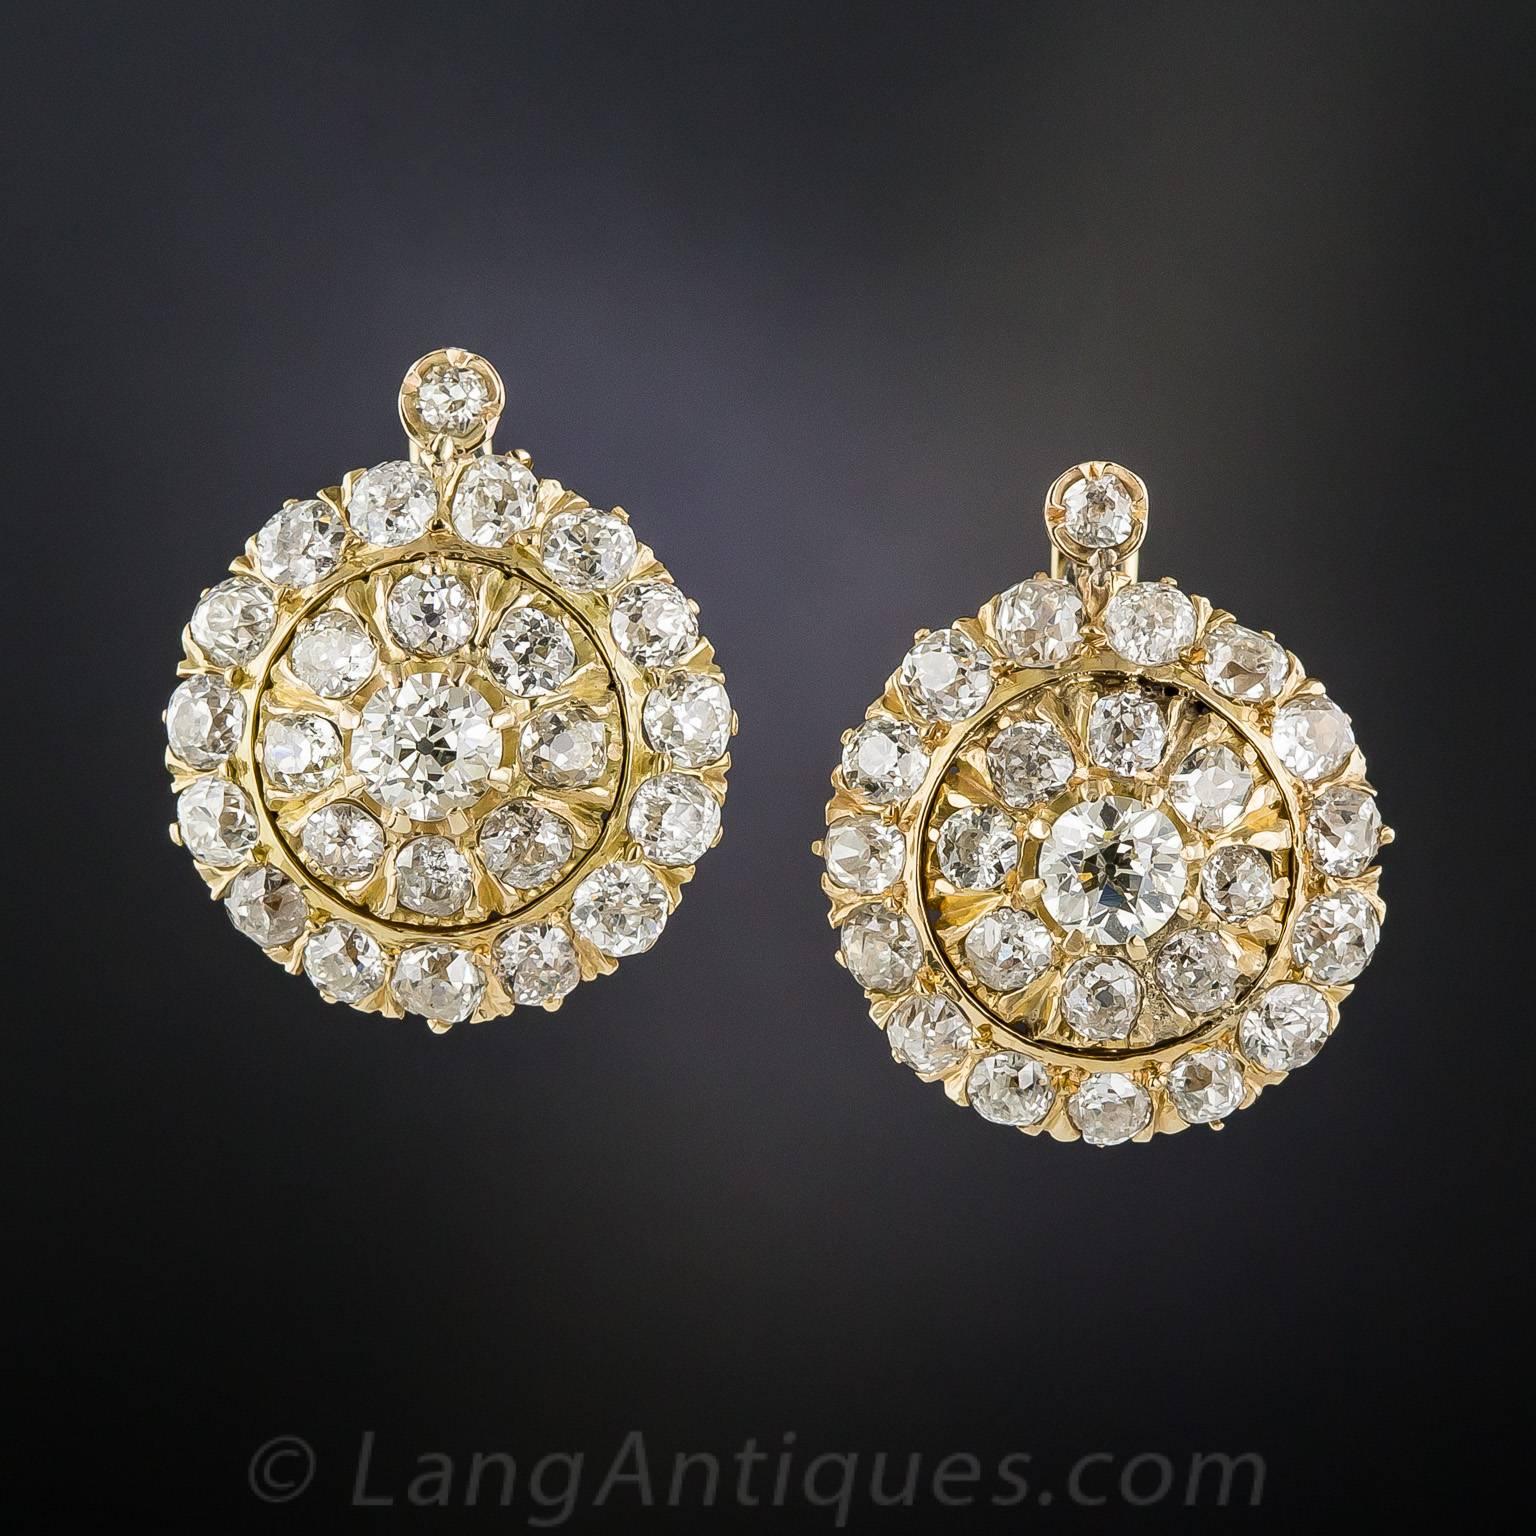 50 bright white and beautiful old mine-cut diamonds, weighing a total of 8.00 carats, are packed into the concentric circles of these super-sparklers, crafted circa 1900, in gleaming 14K gold. The dazzling discs (7/8 inch diameter) are surmounted by